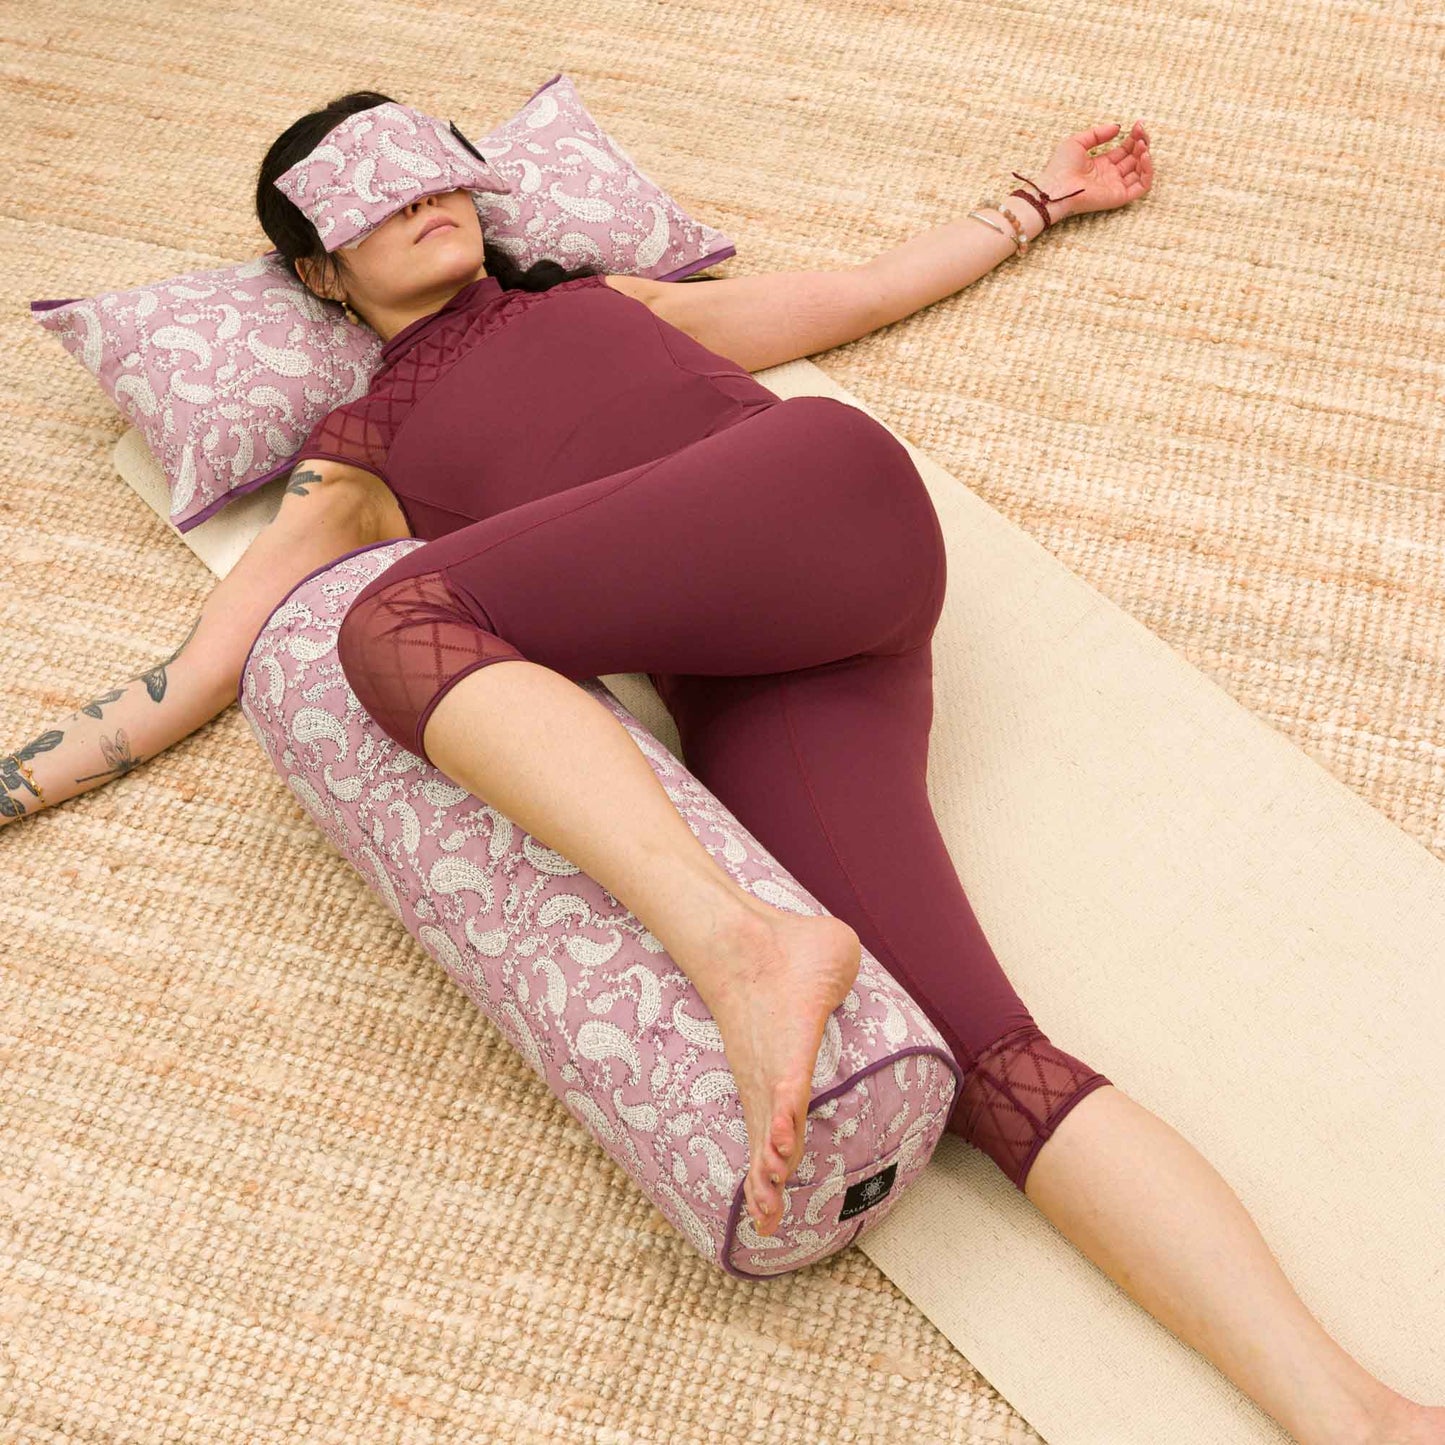 Restorative Yoga With One Bolster - 5 Relaxing Poses , bolster yoga